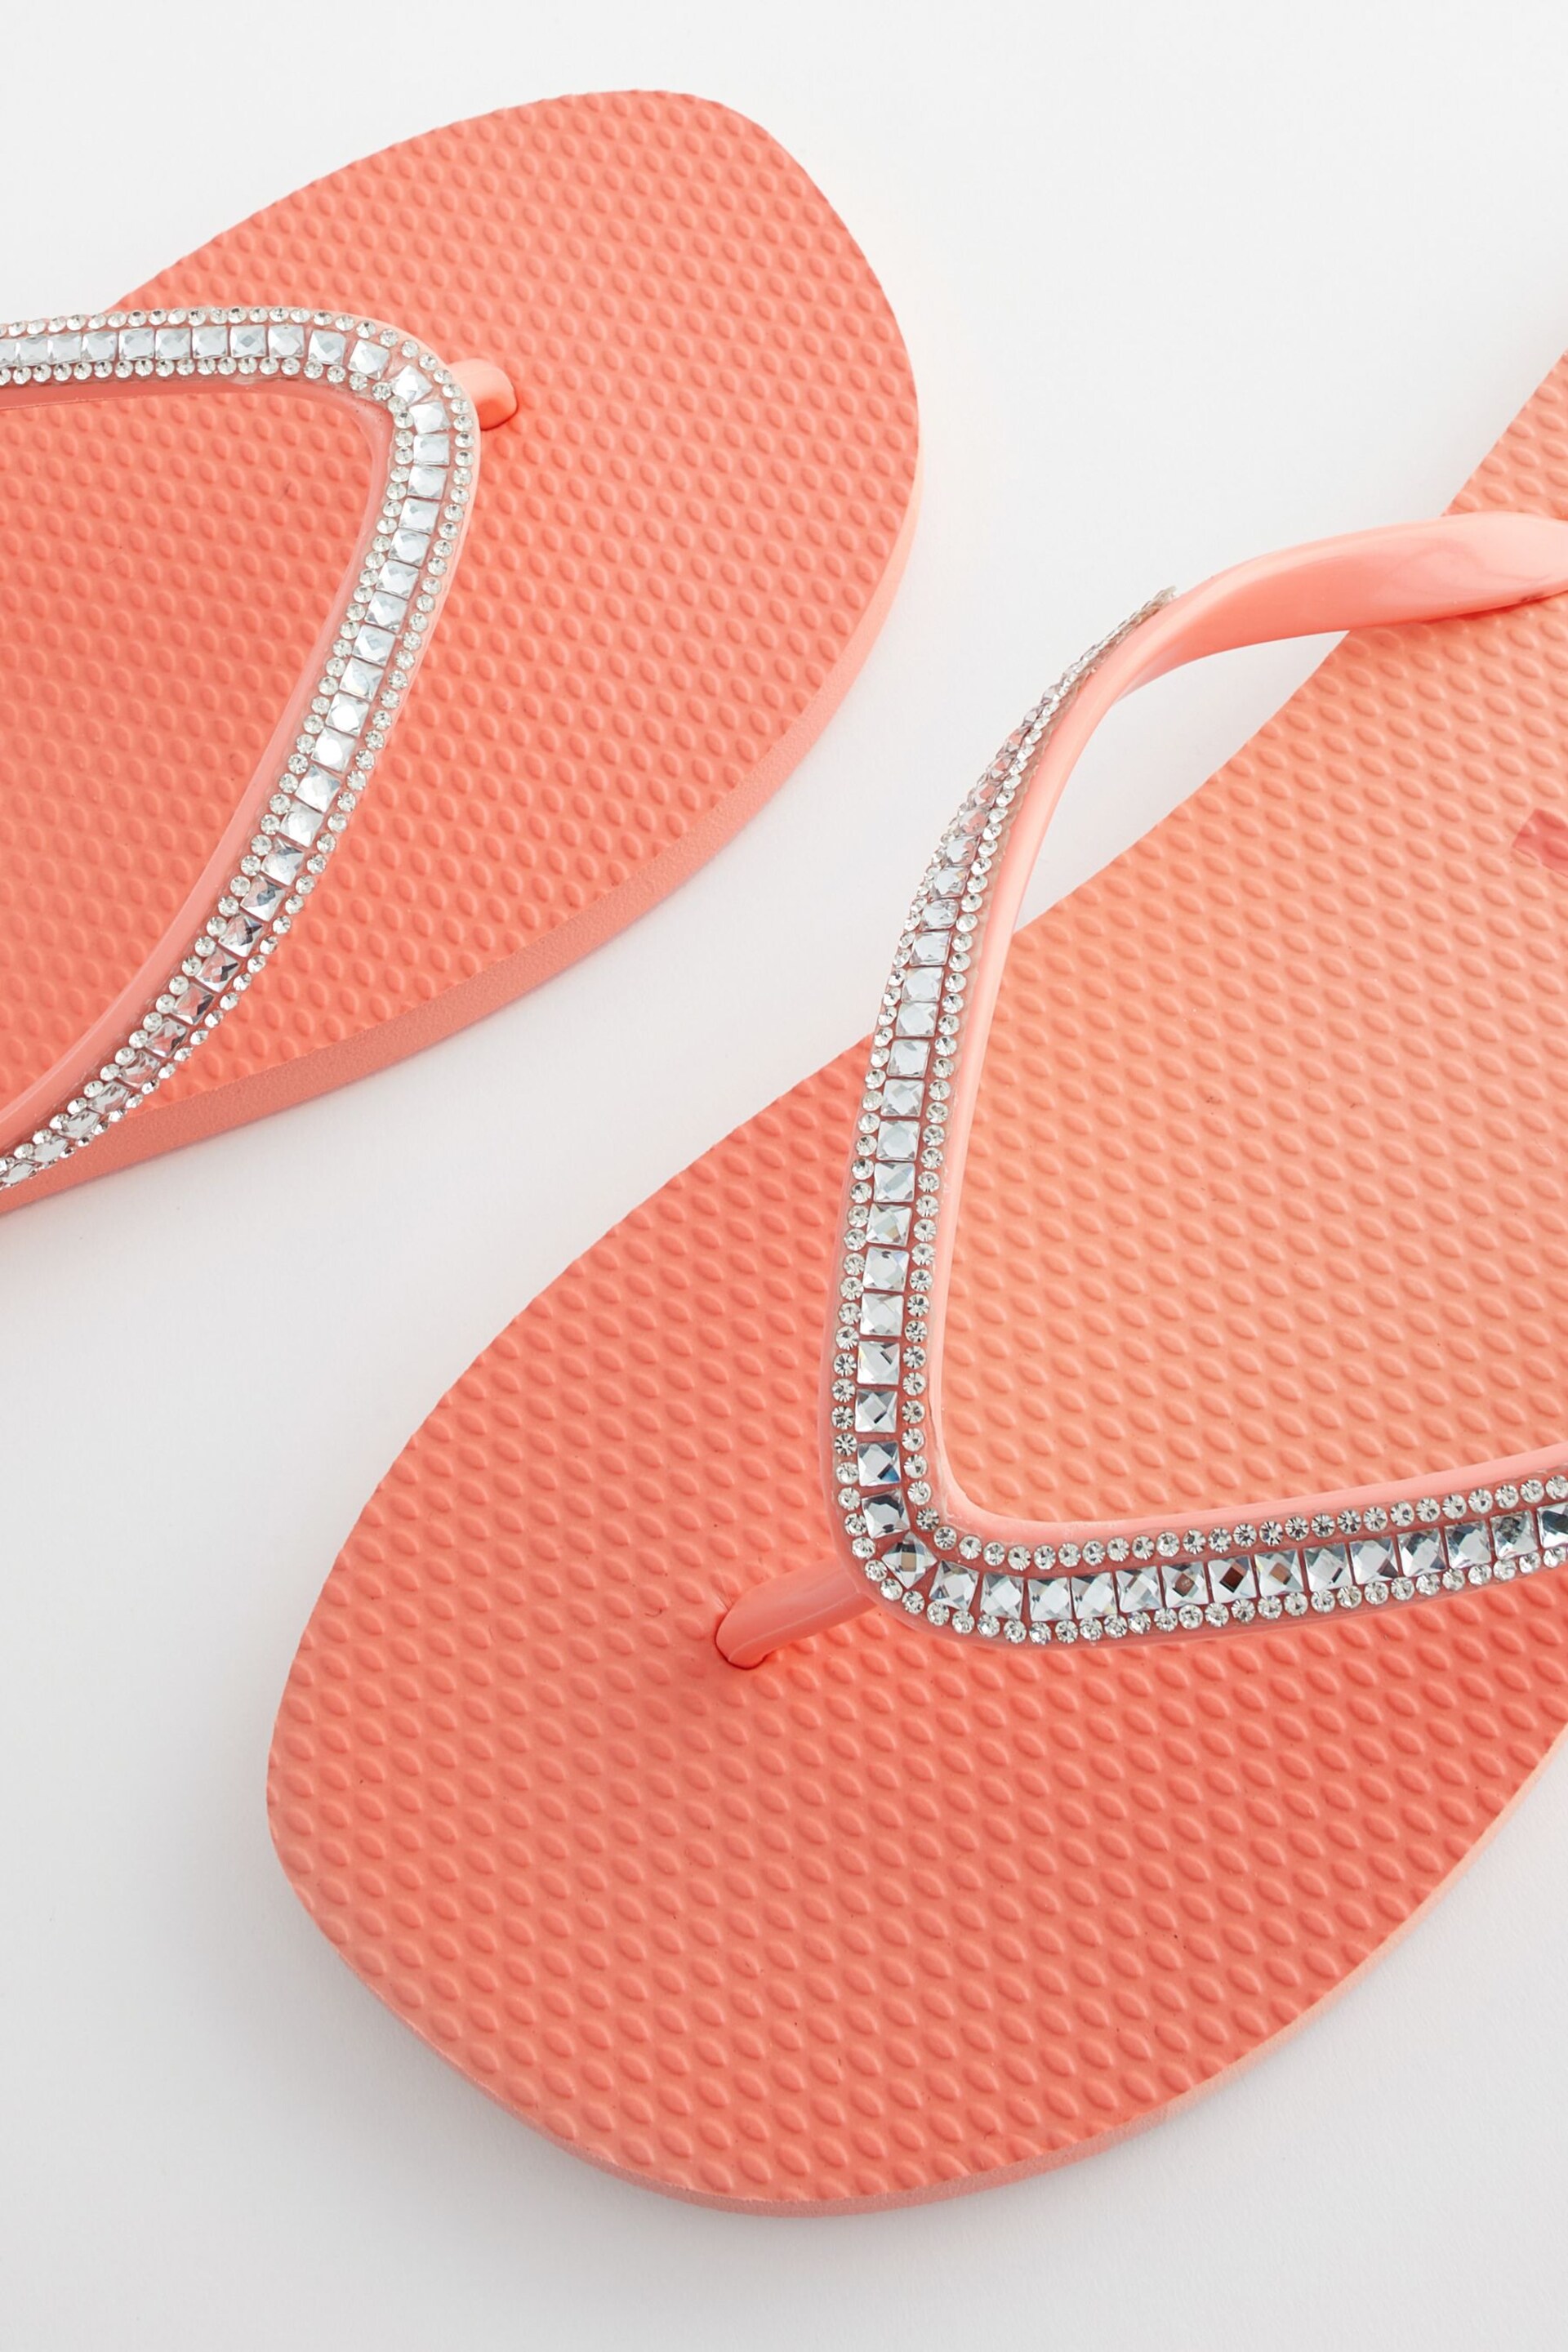 Coral Pink Jewelled Beach Flip Flops - Image 5 of 5